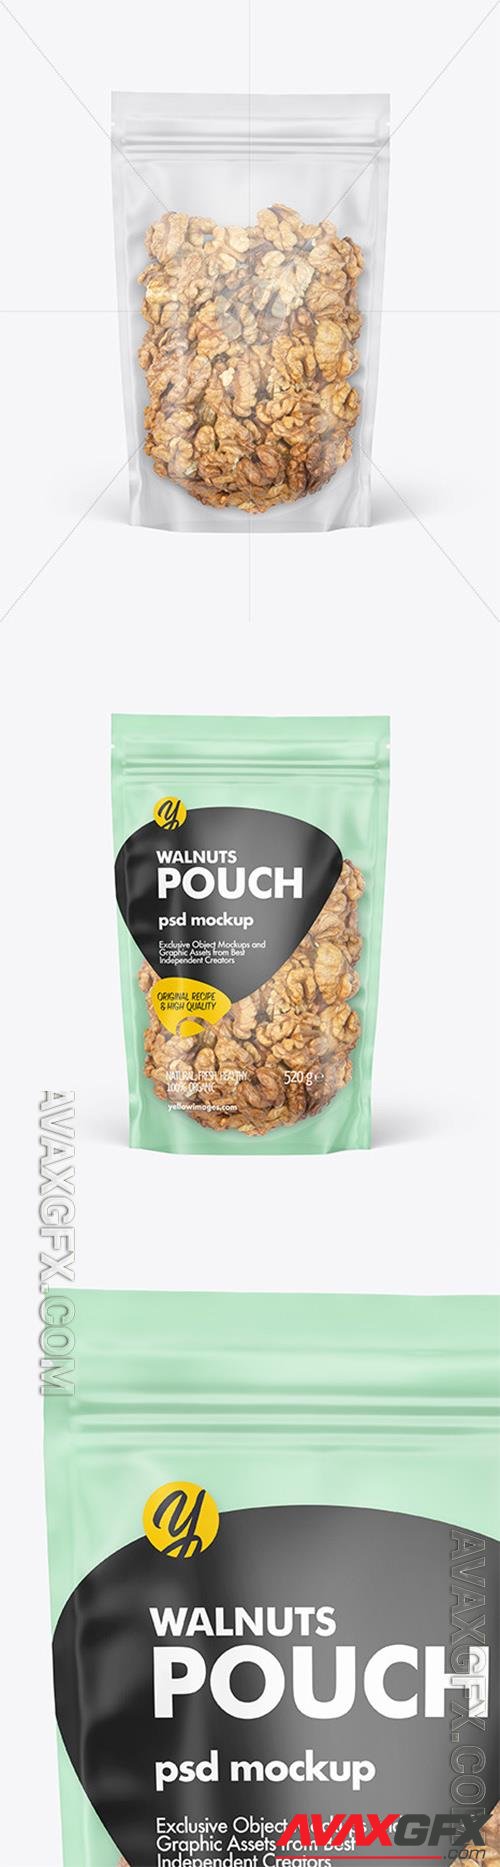 Frosted Plastic Pouch w/ Walnuts Mockup 82559 TIF